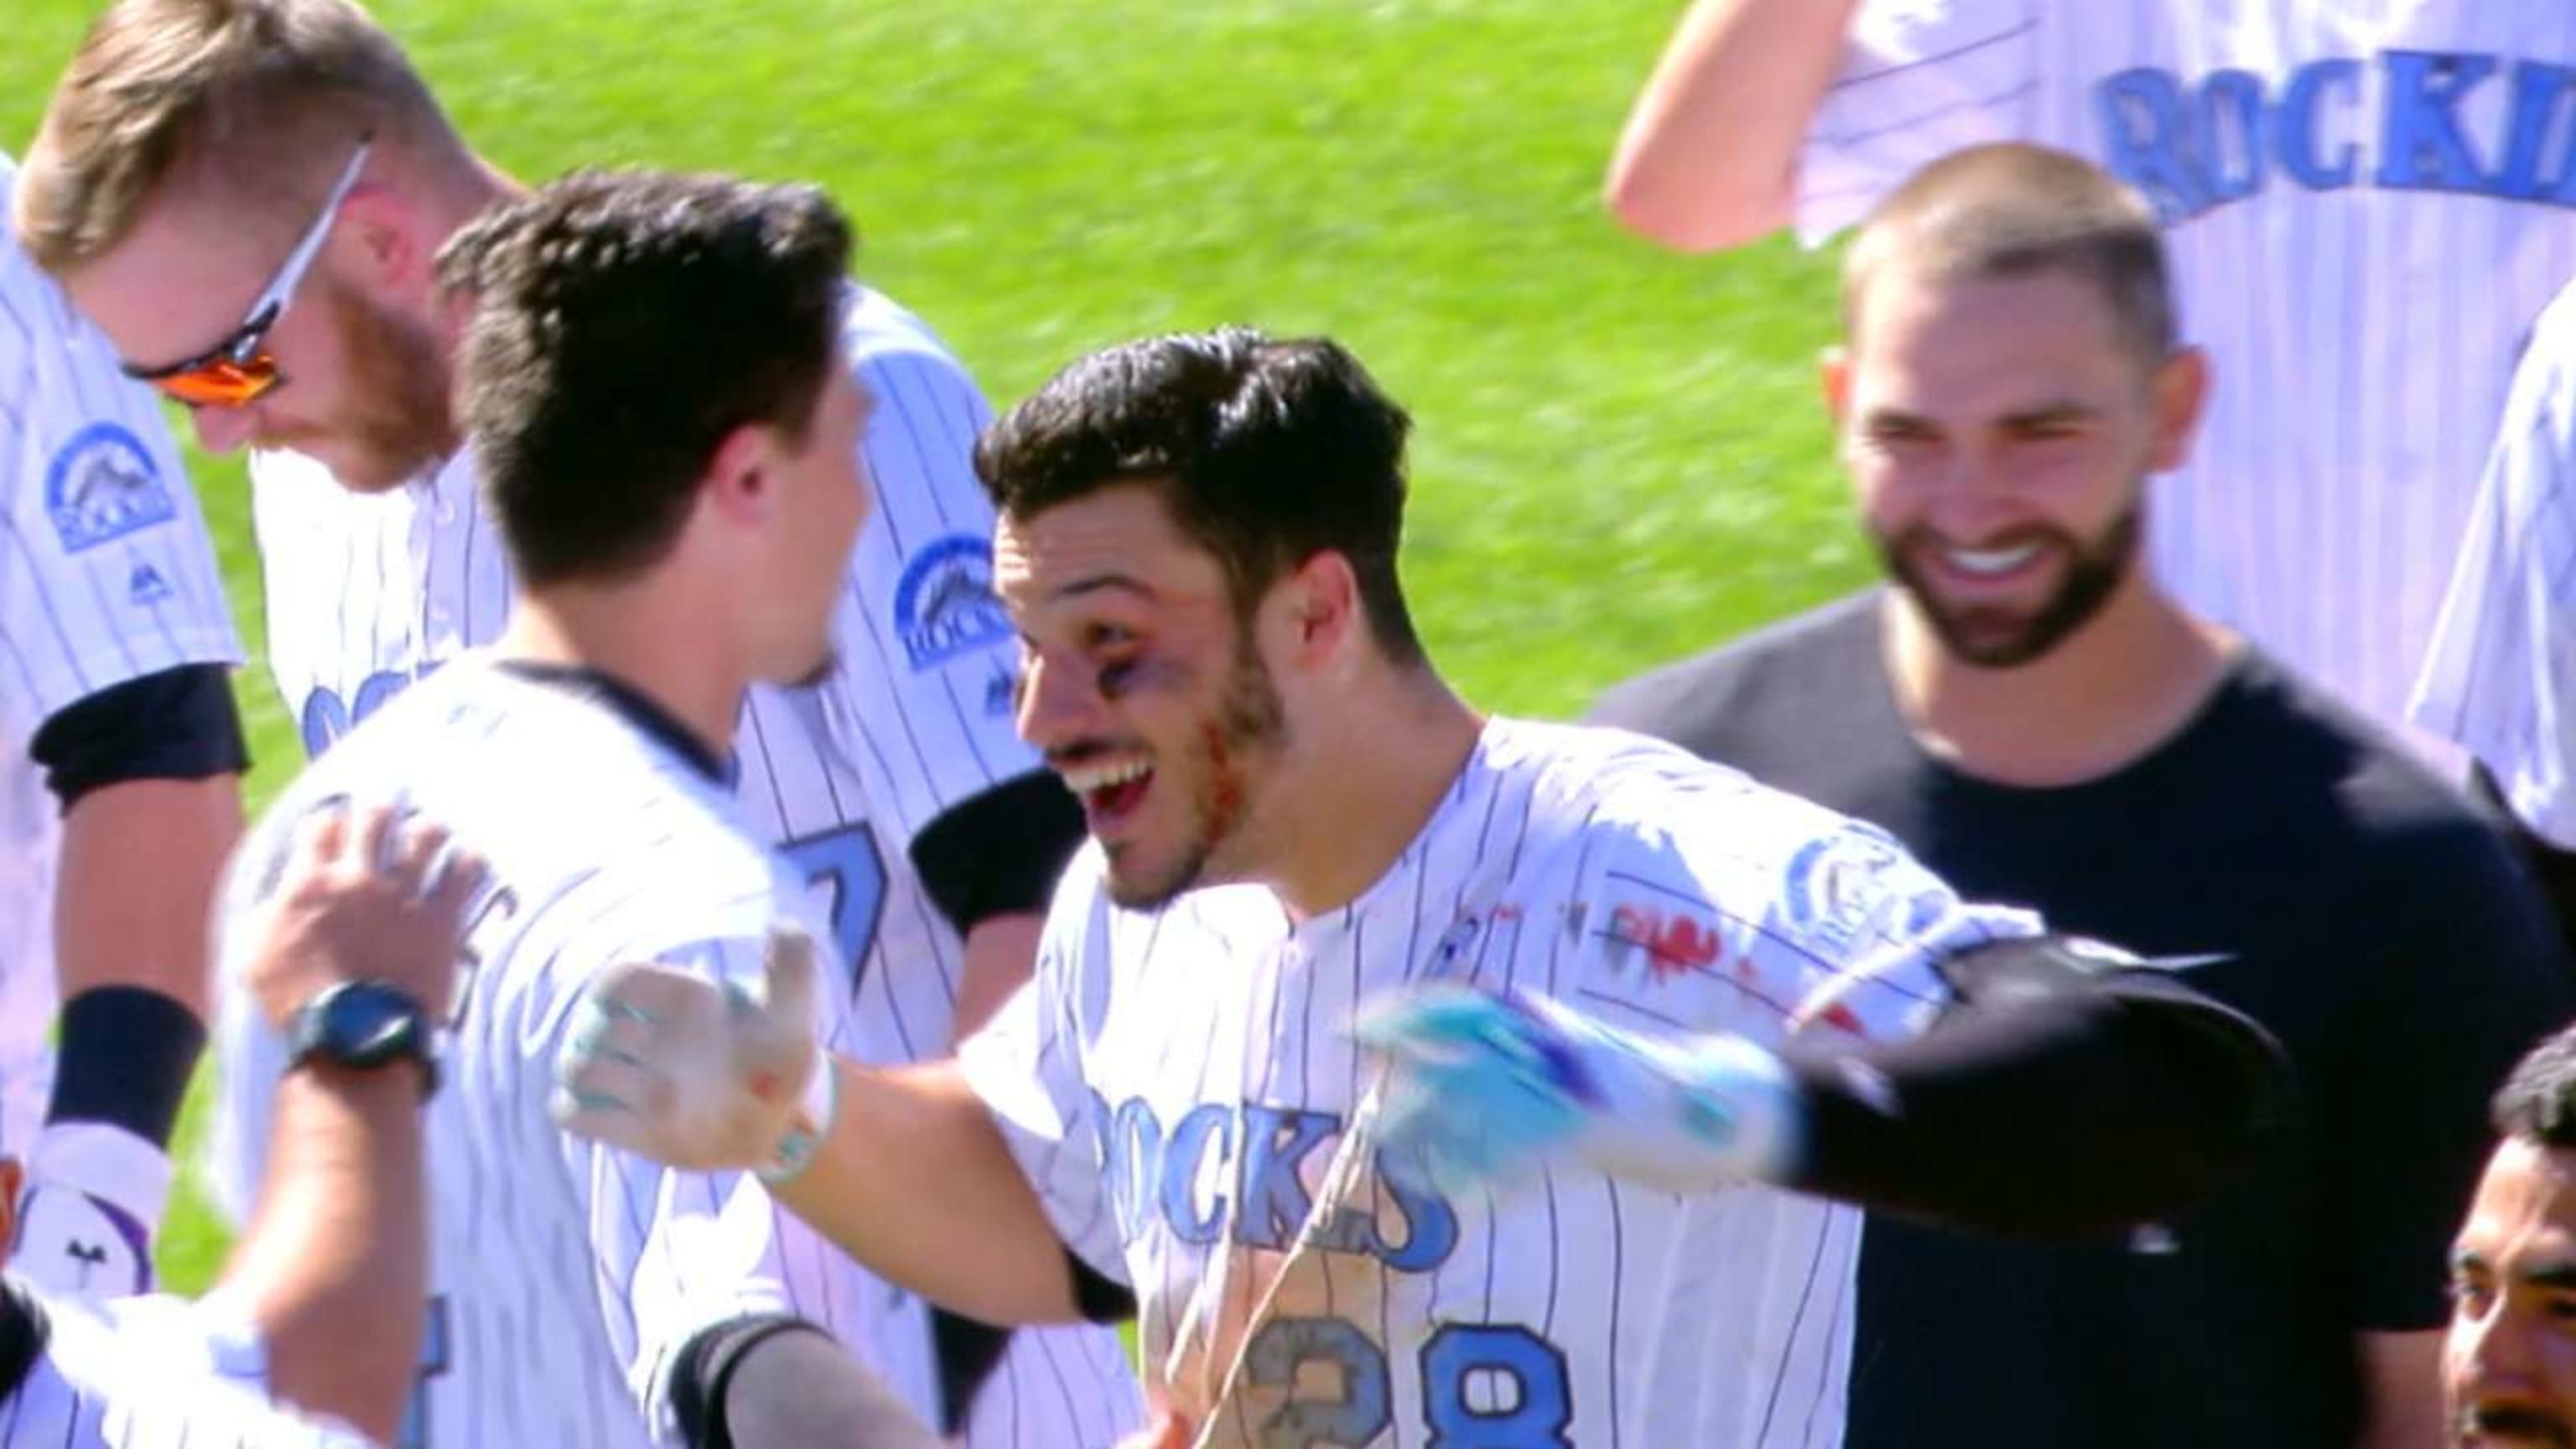 The Rockies basically beat up Nolan Arenado in a bloody walk-off cycle  celebration